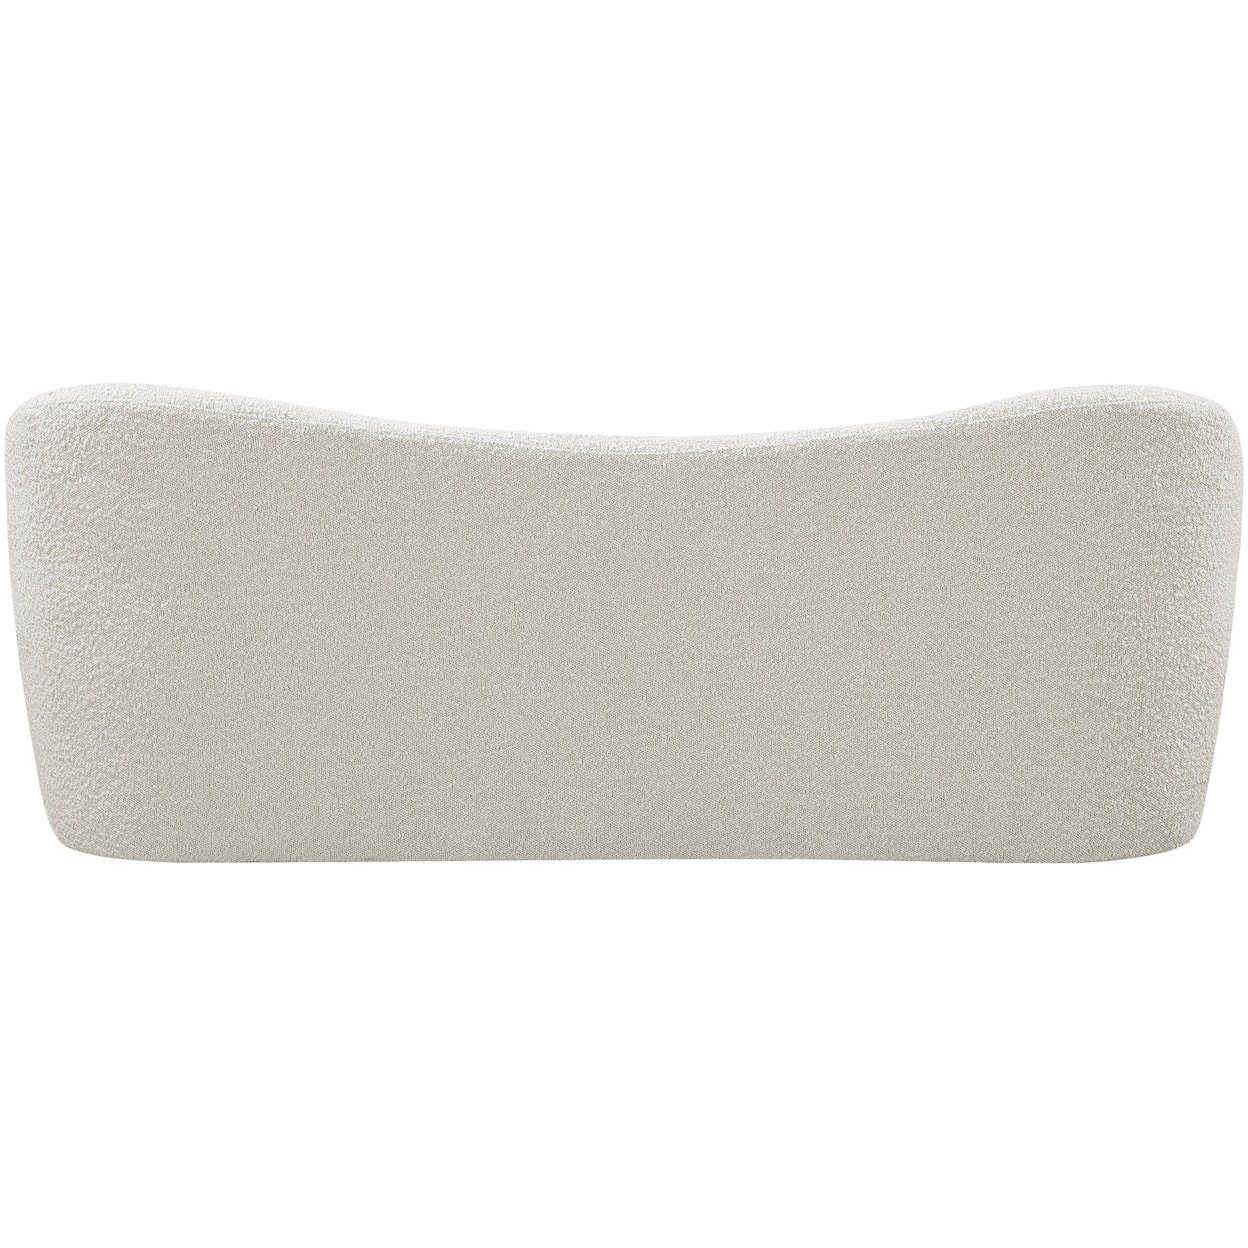 Meridian Furniture Flair Upholstered Cream Boucle Fabric Bench